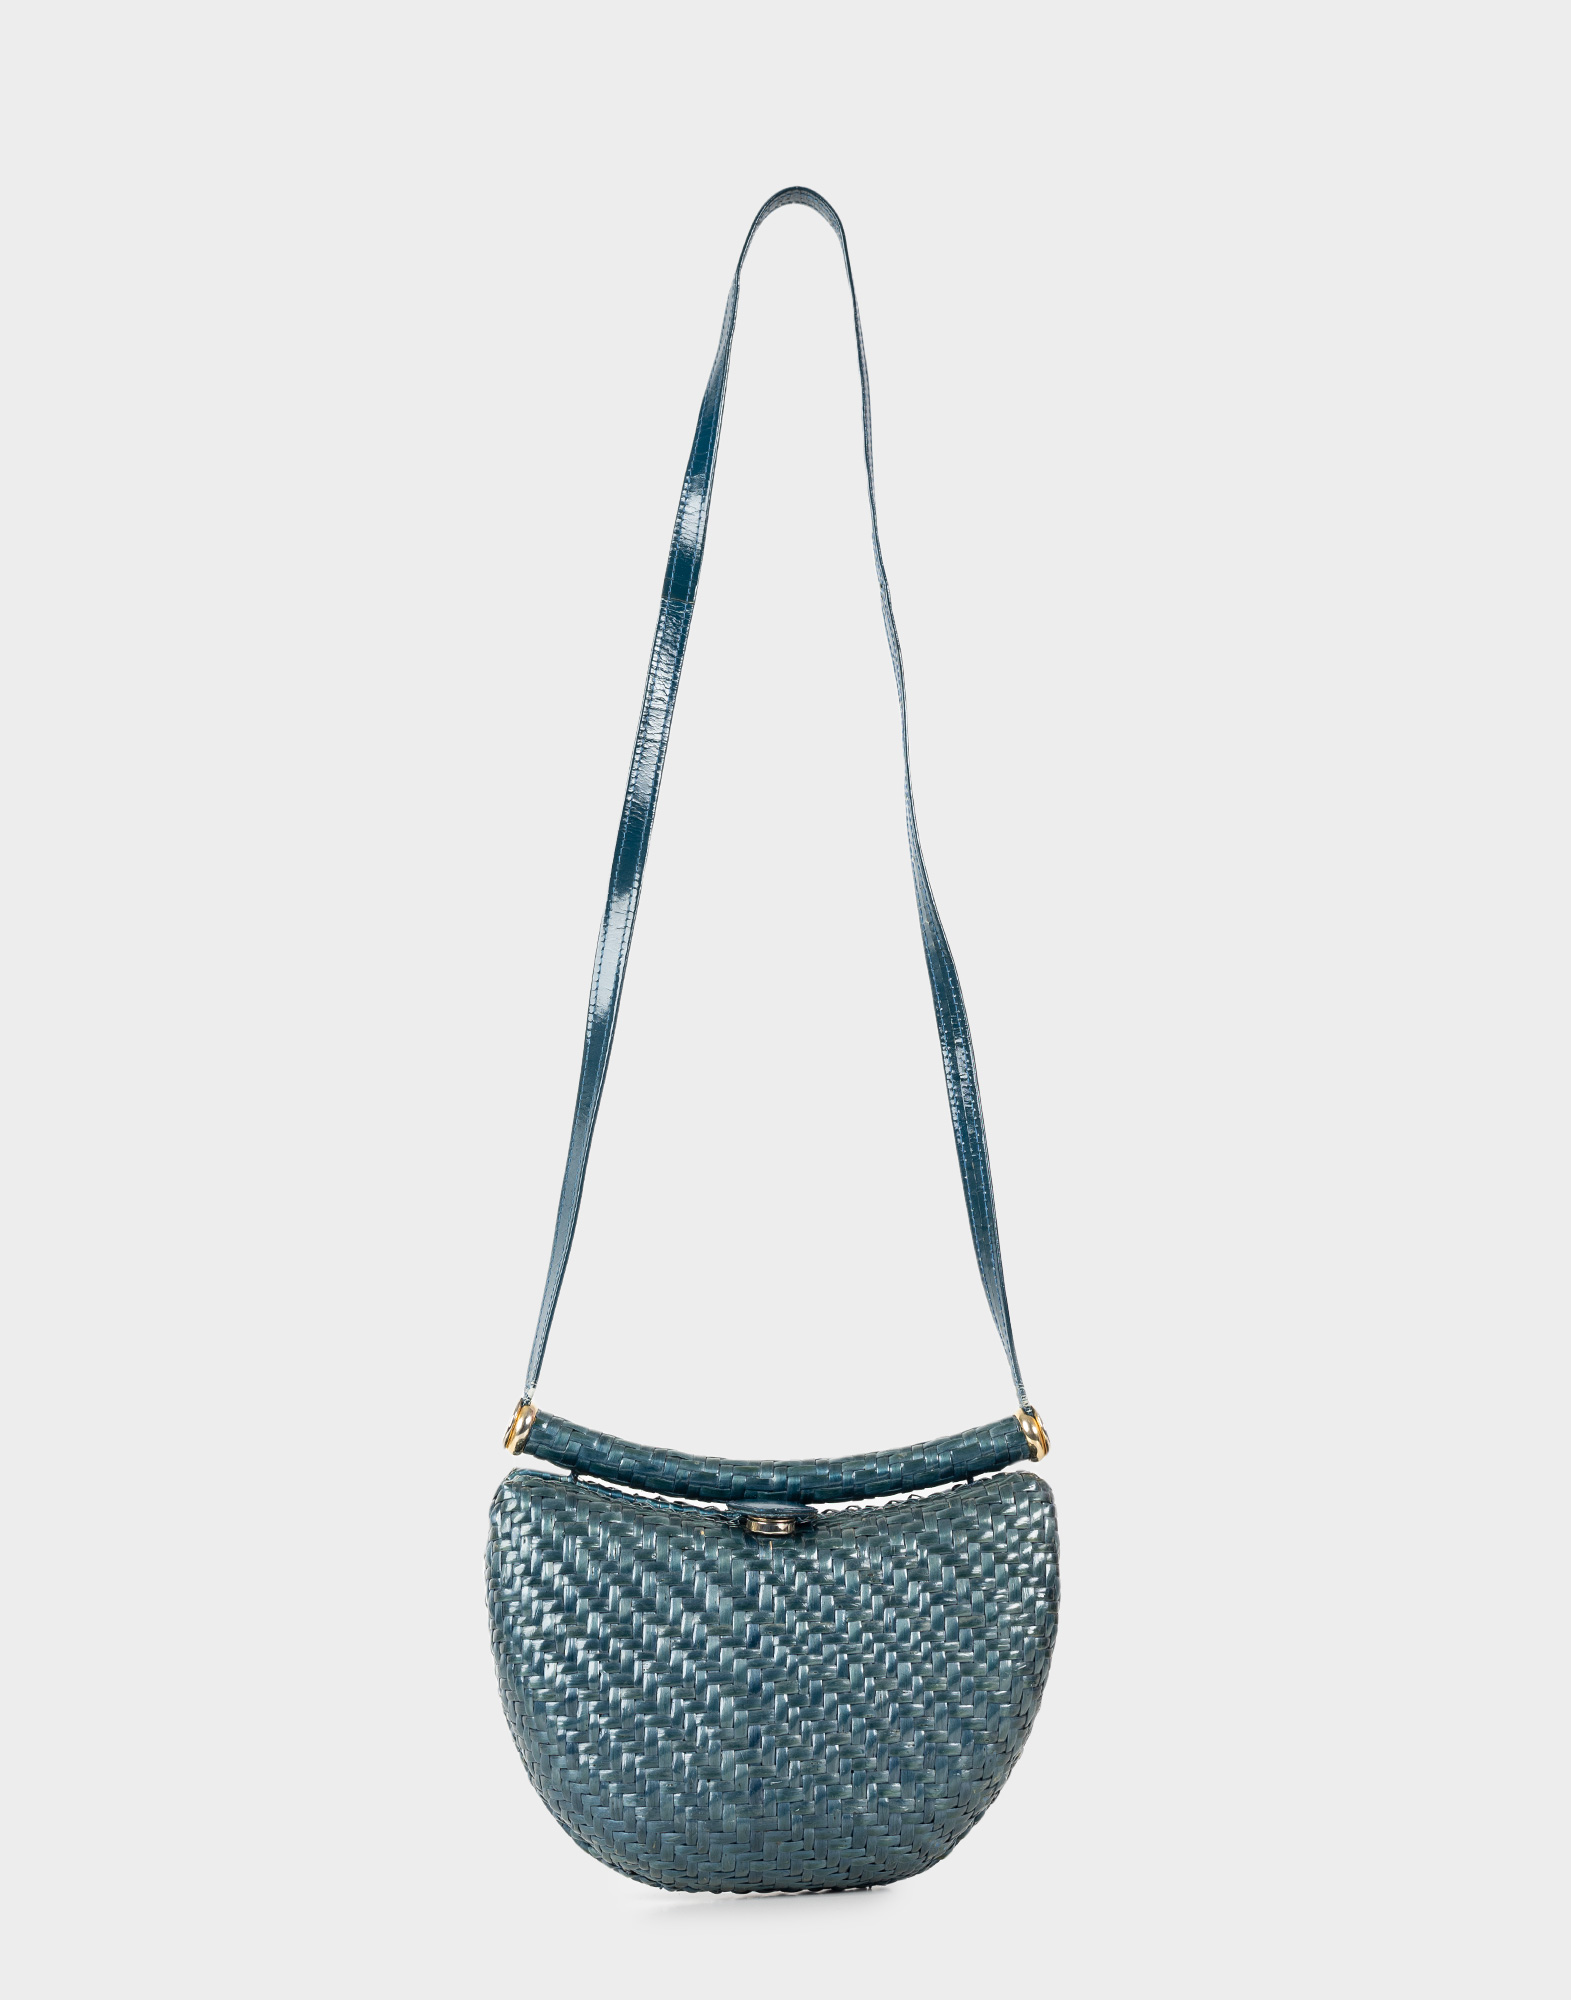 80s light blue wicker straw bag with a long leather shoulder strap.